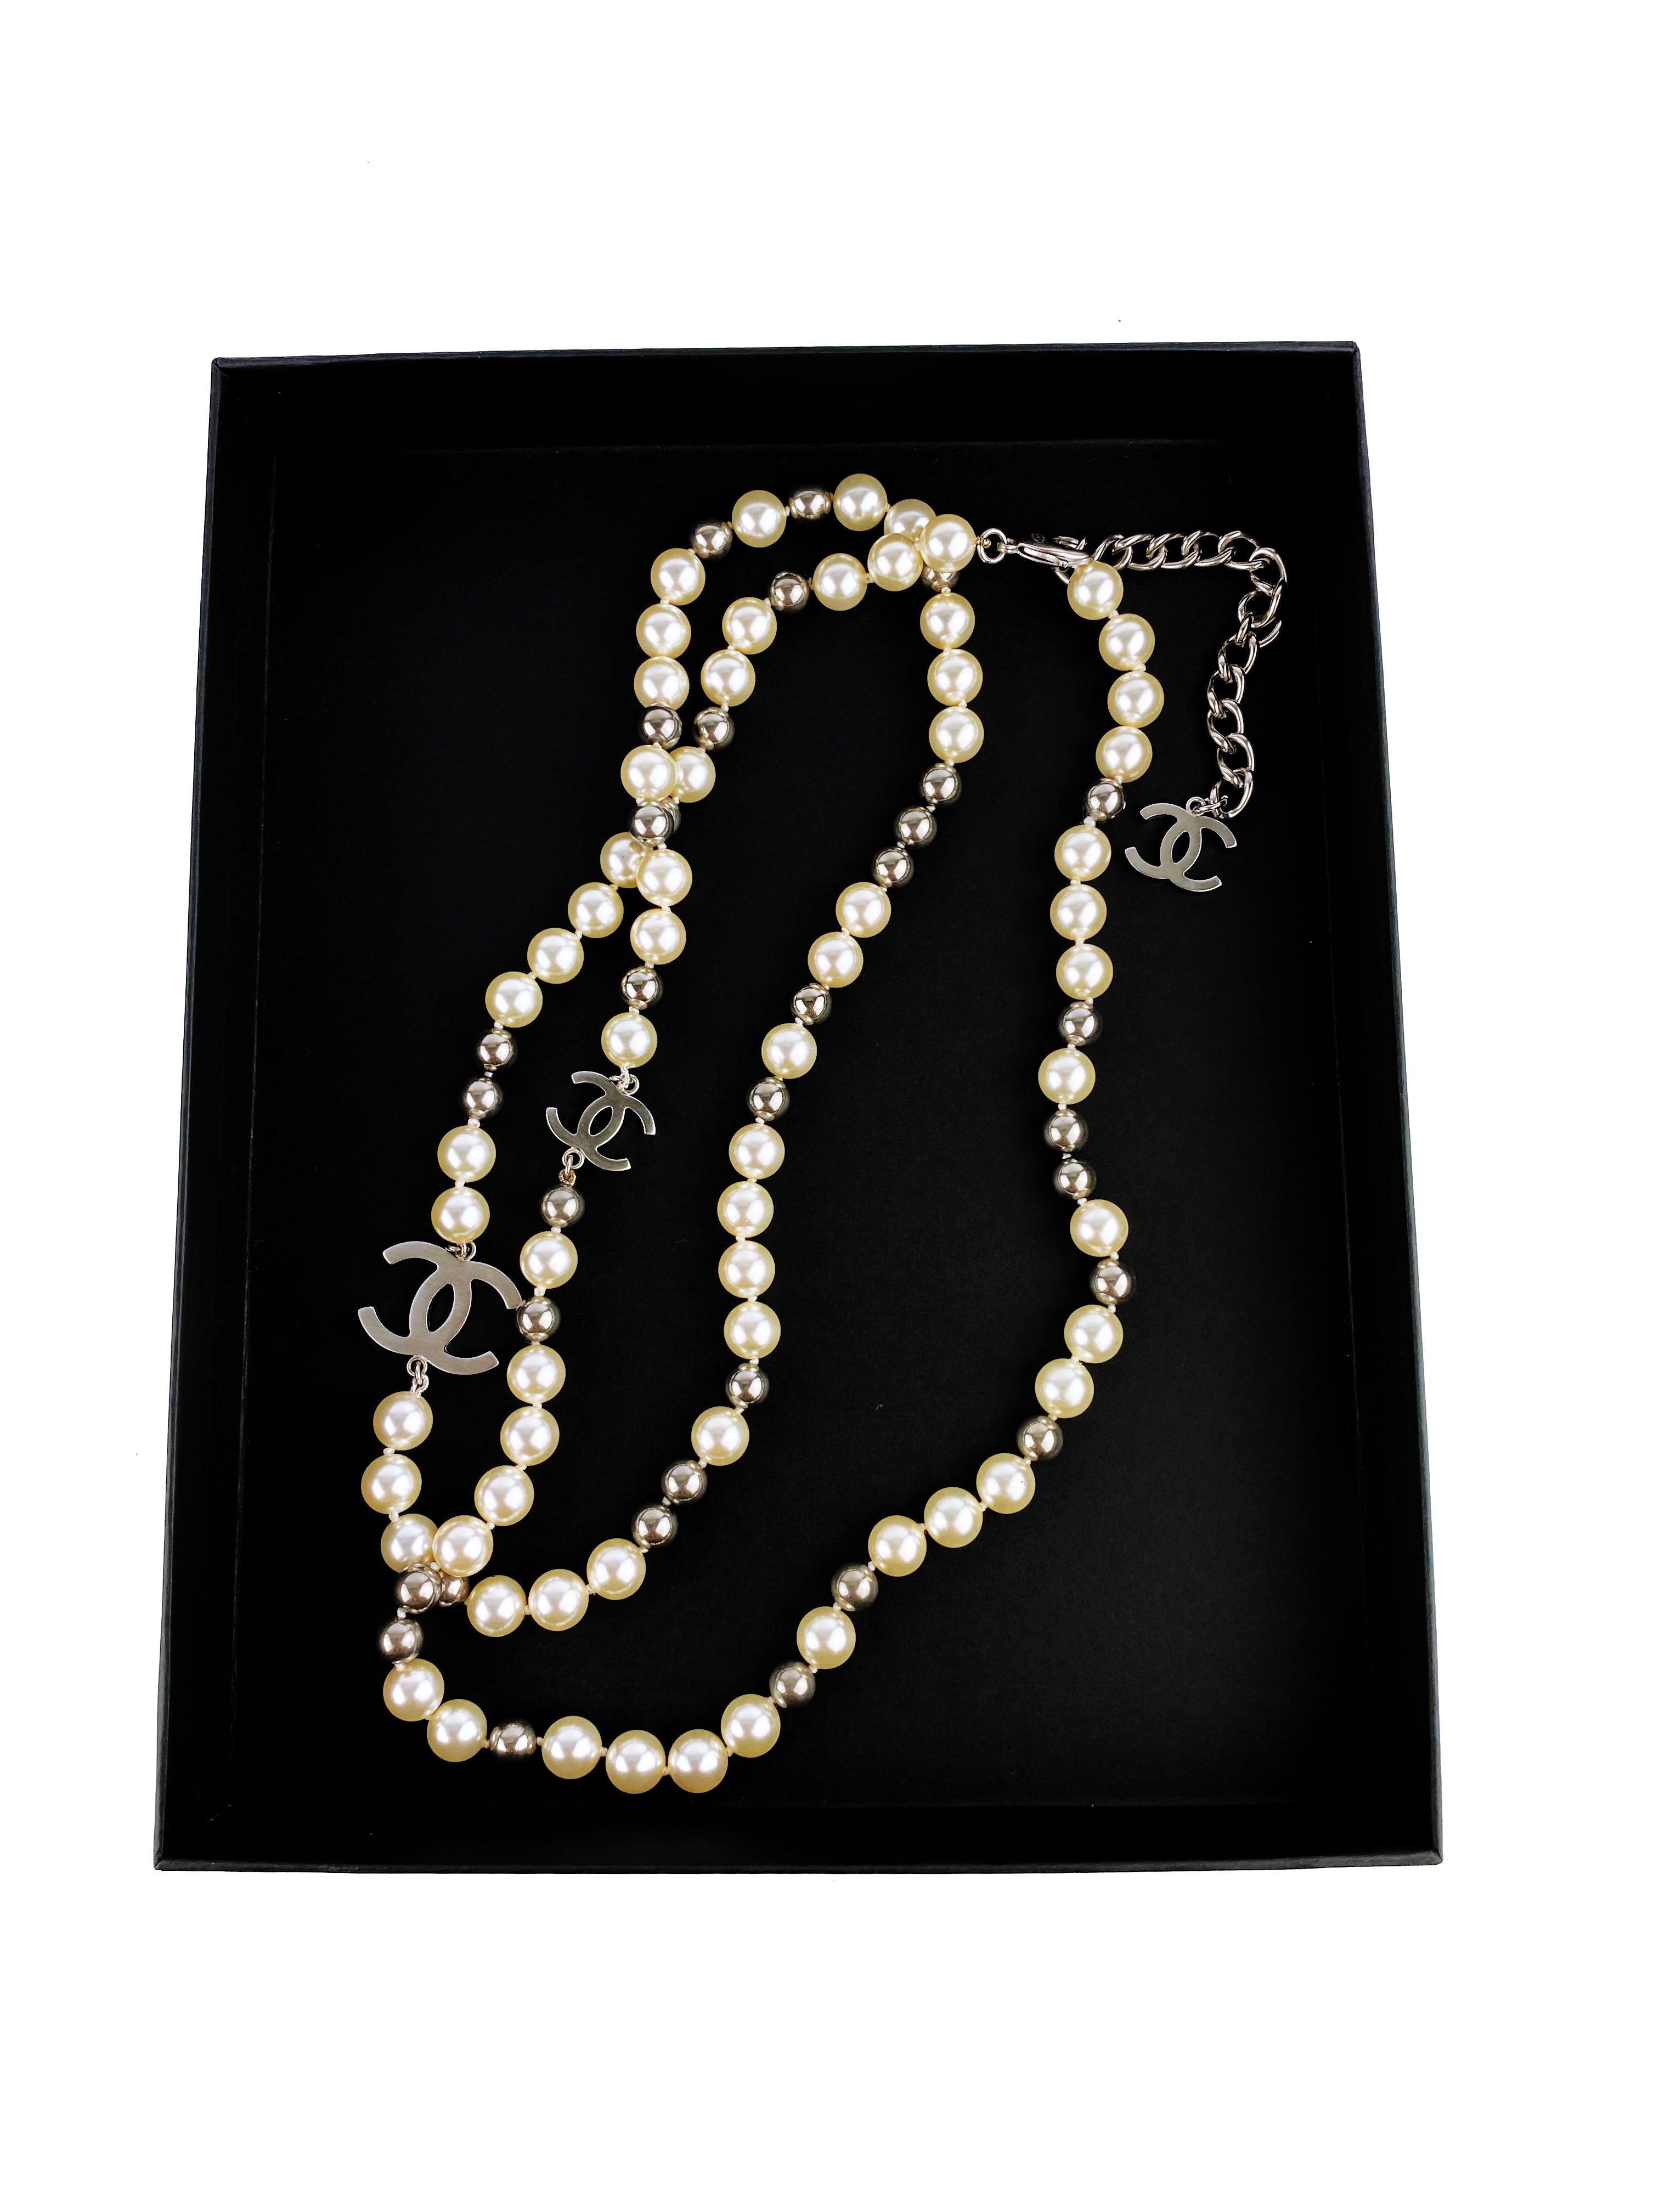 chanel-pearl-cc-necklace-3.jpg